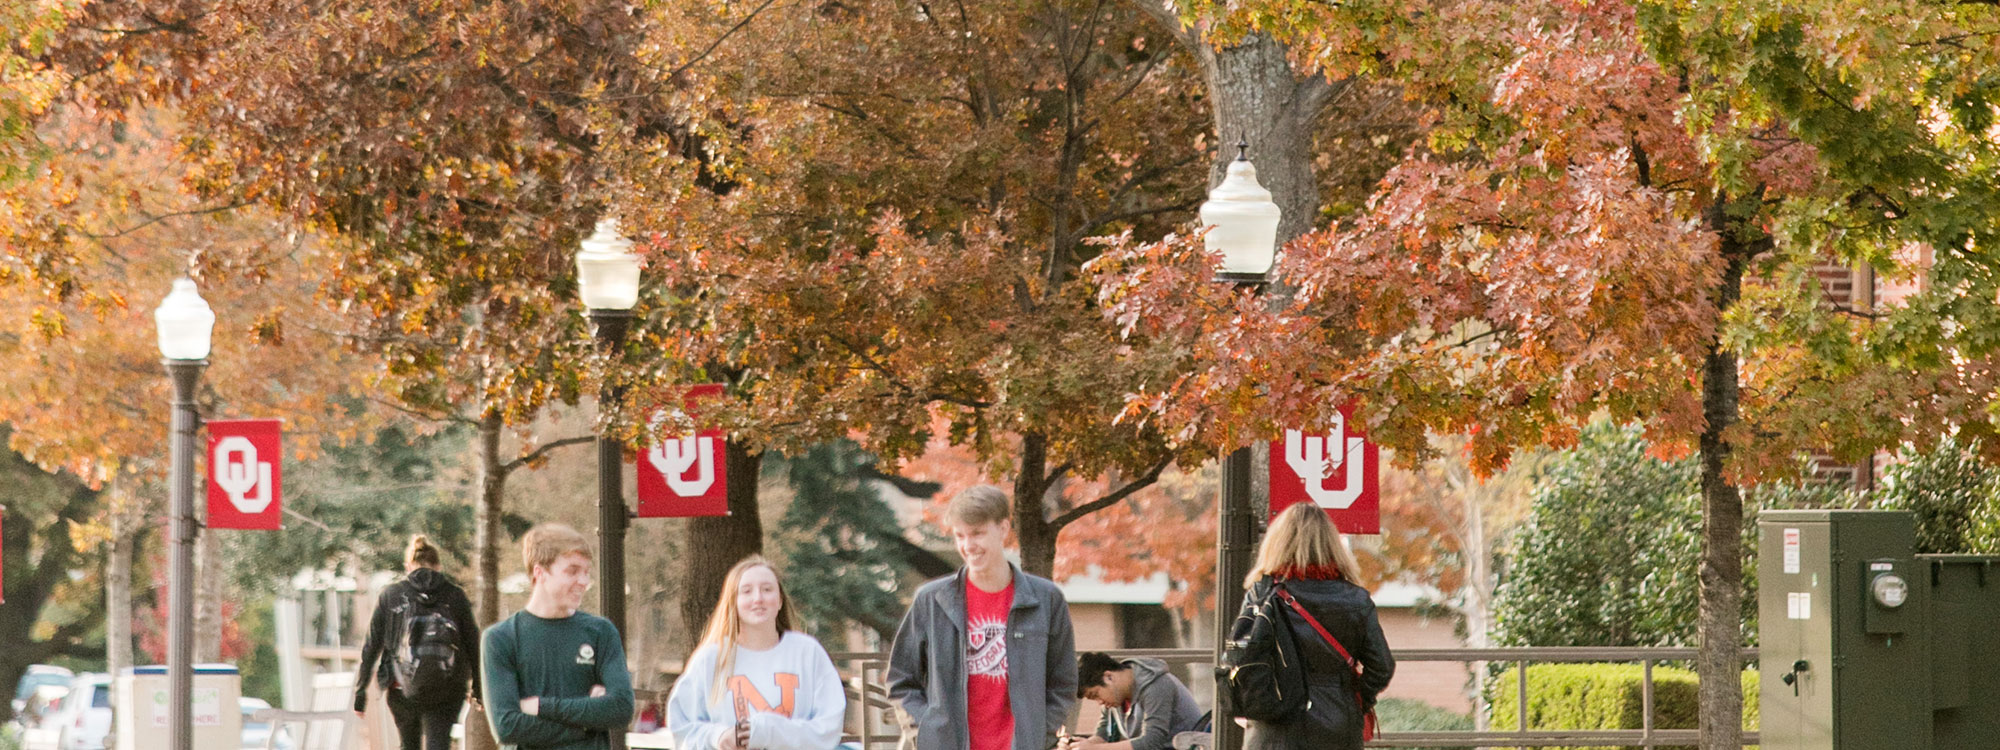 View of Norman campus in the fall with students walking